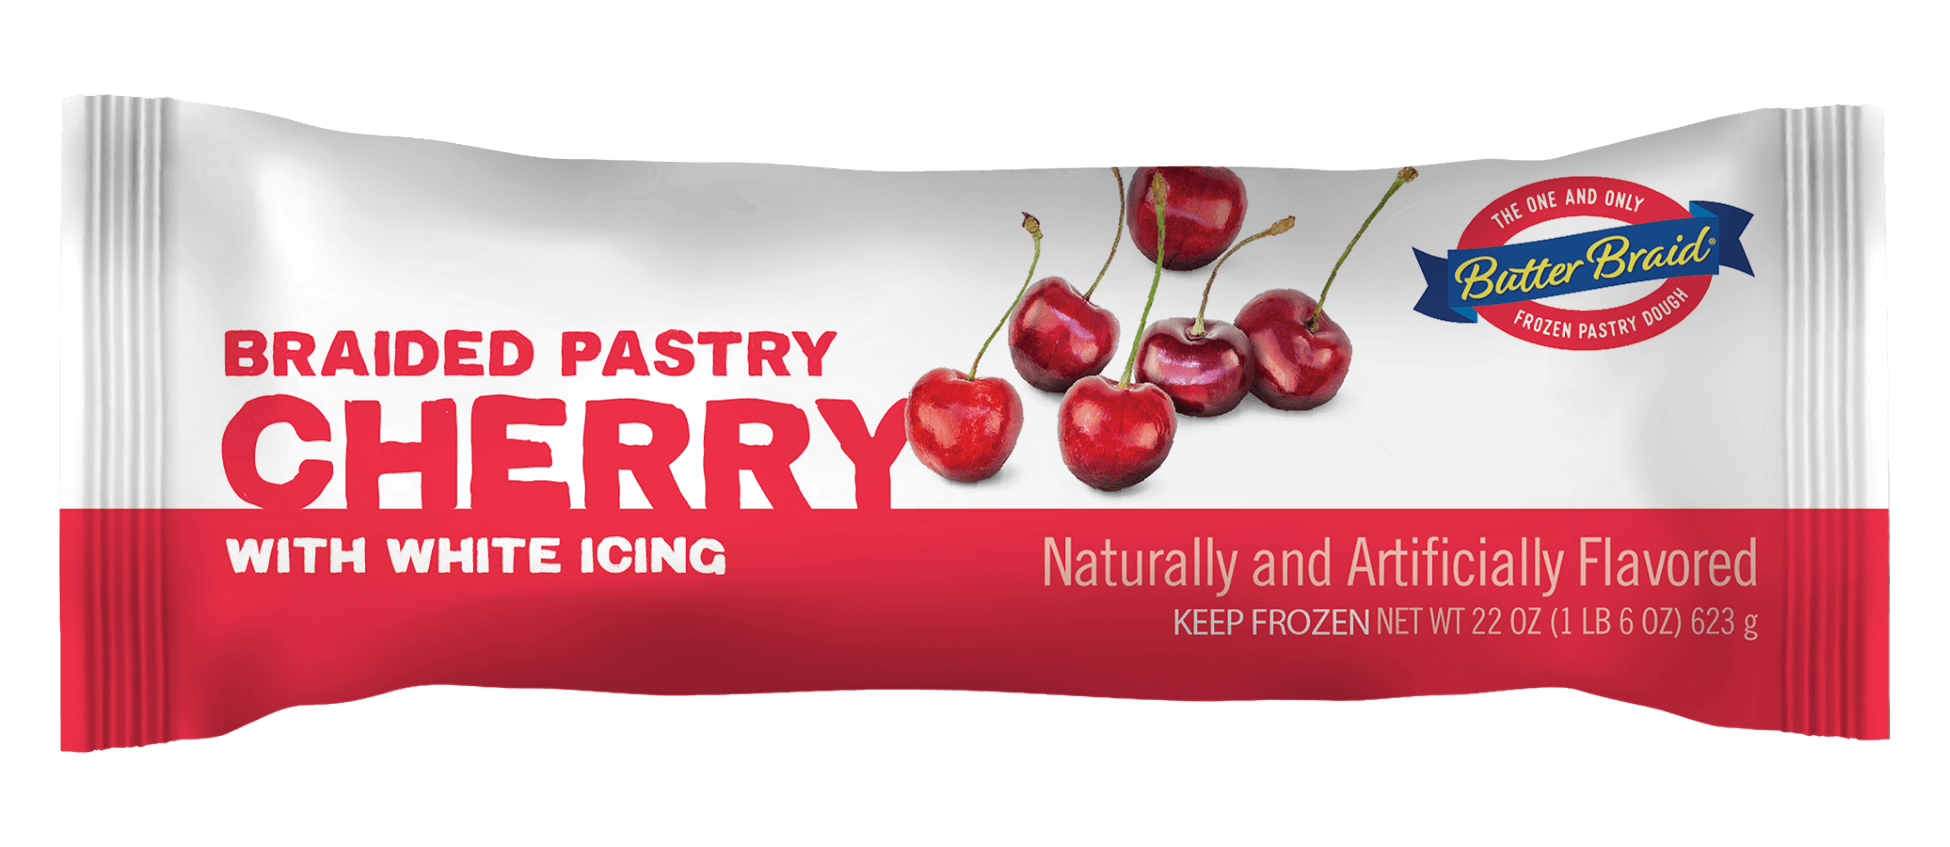 Cherry Butter Braid® Pastry packaging